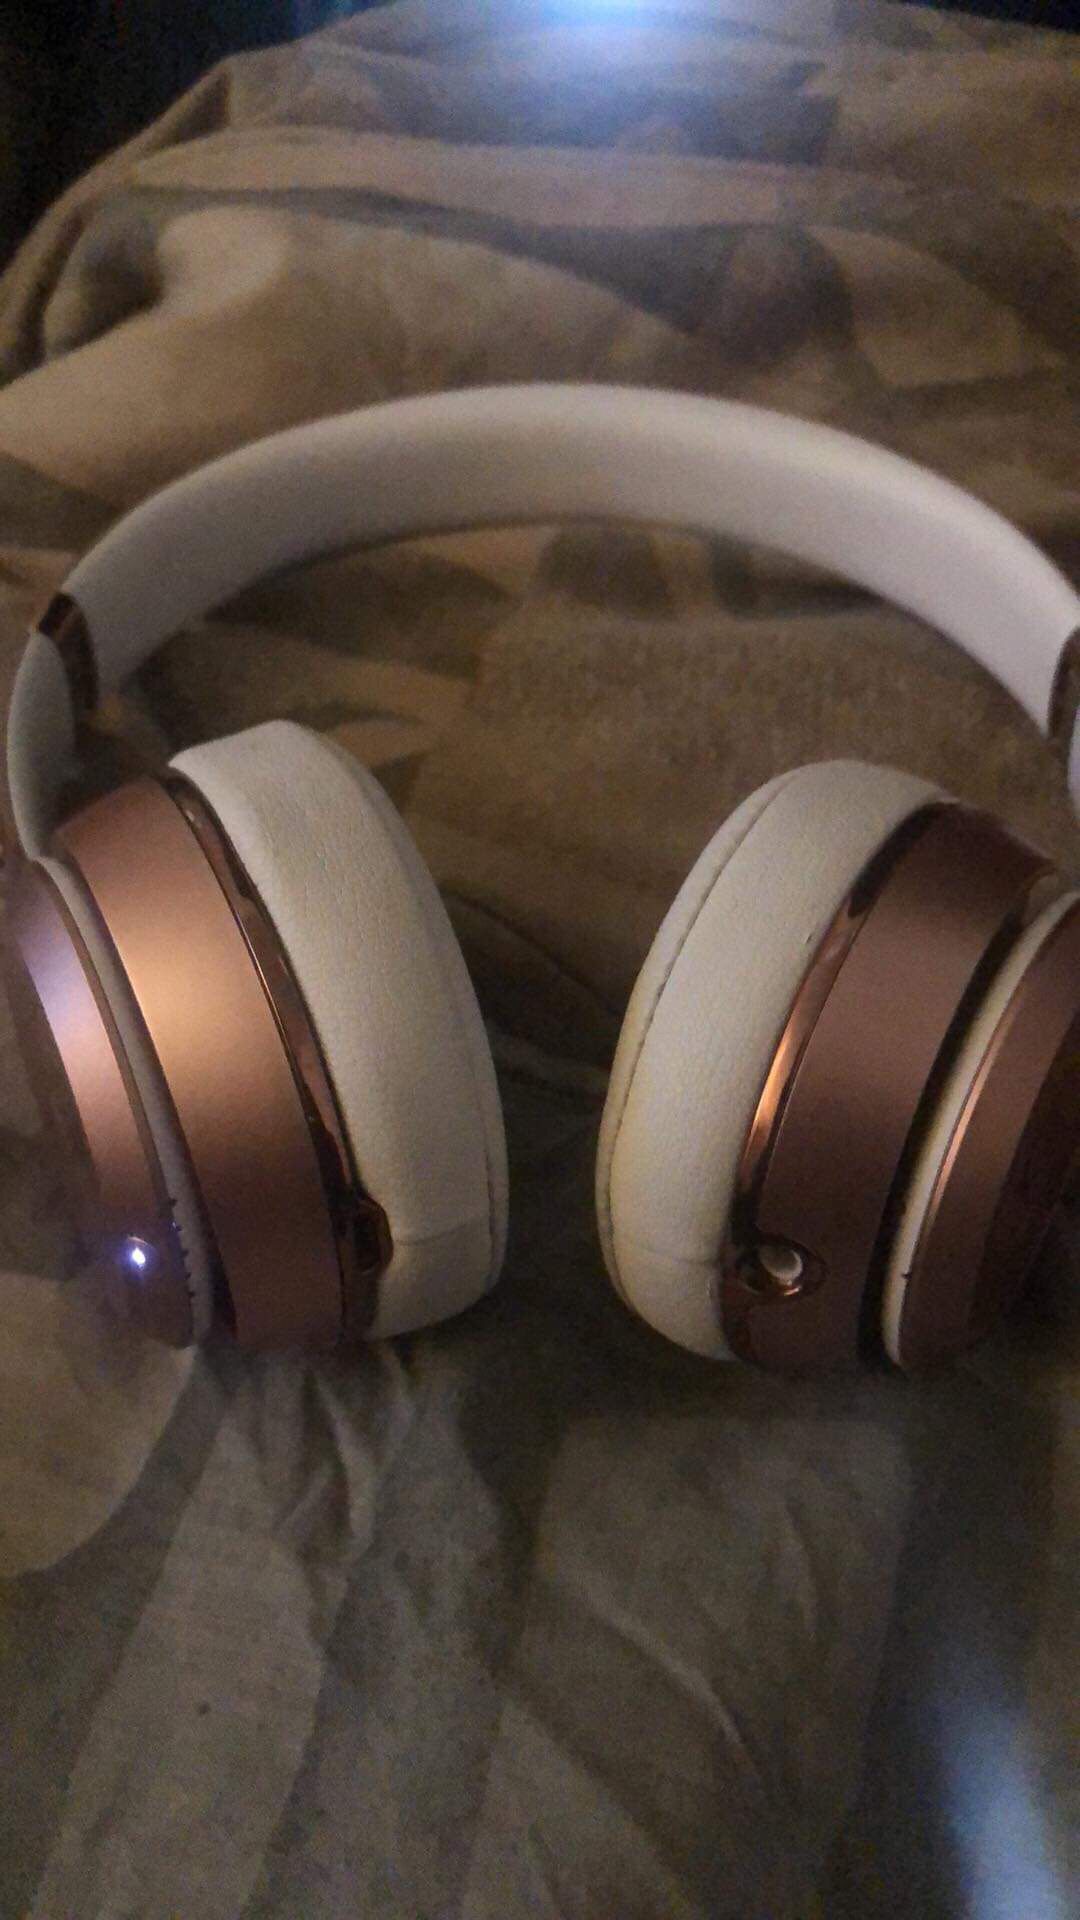 Beats Solo 3 (Rose Gold)